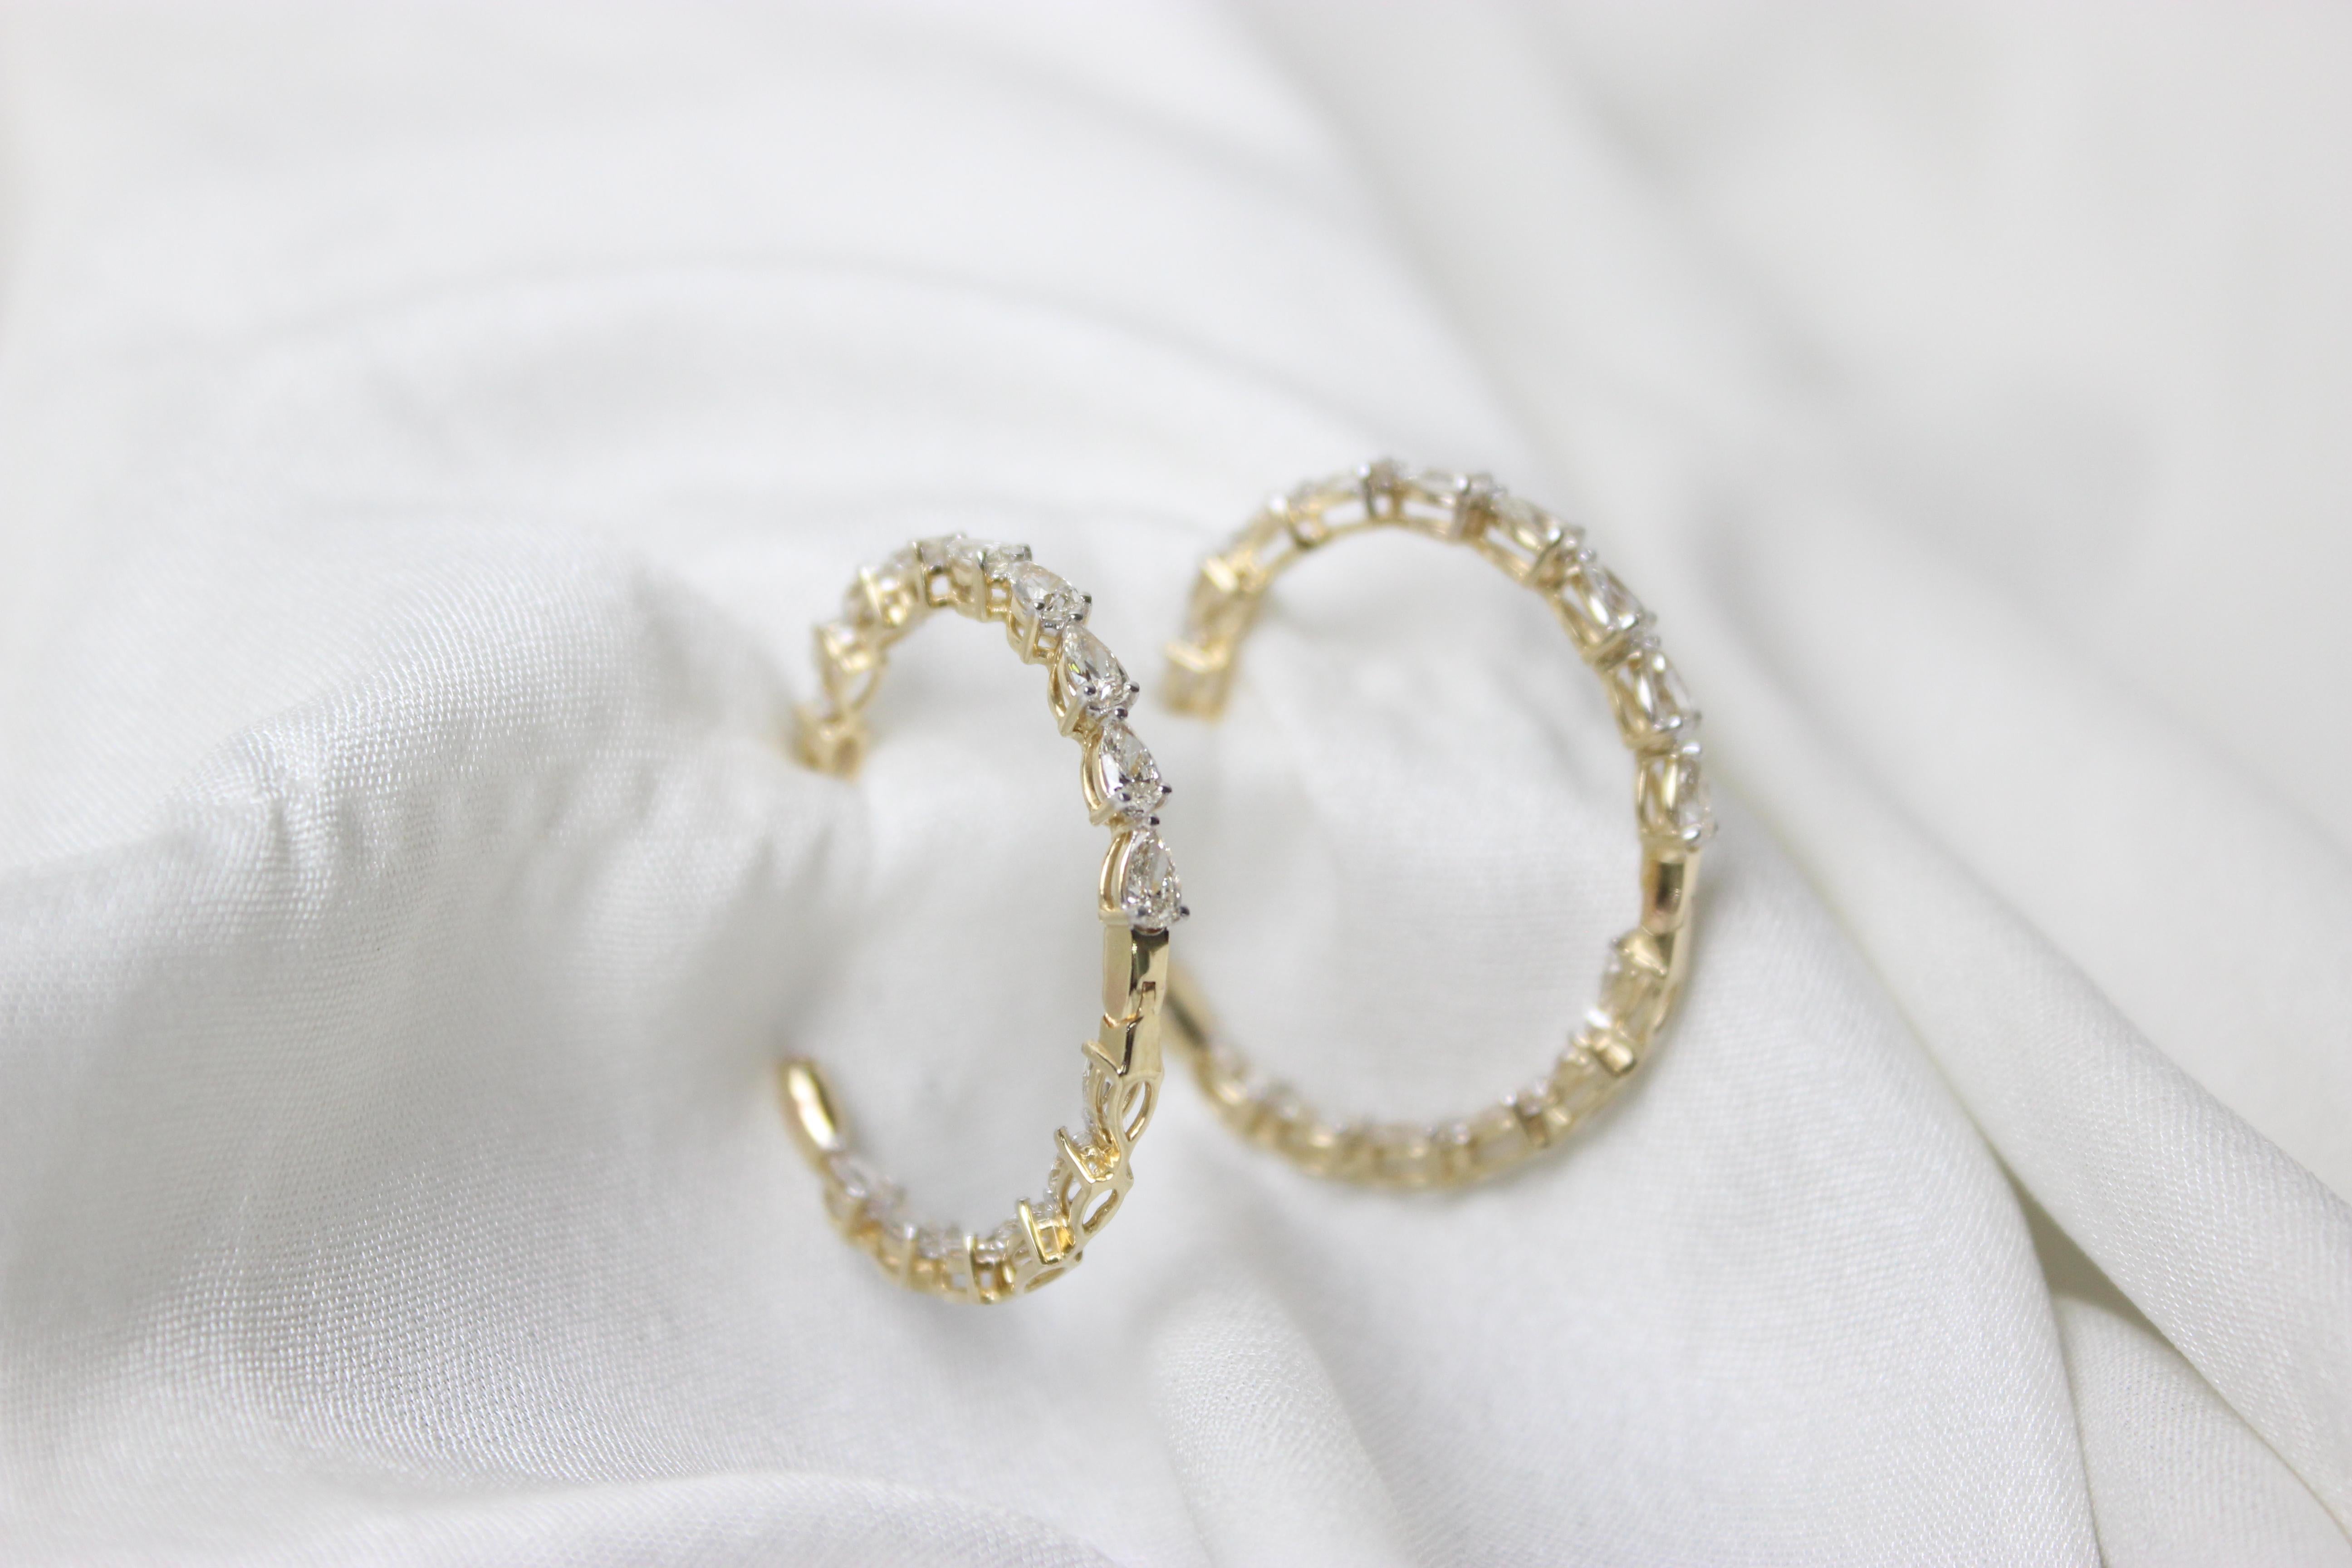 Indulge in timeless elegance with our Marquise Diamonds Hoop Earrings crafted in exquisite 18K solid gold. The elongated marquise diamonds gracefully adorn the hoops, creating a sophisticated and eye-catching design. The brilliance of the diamonds